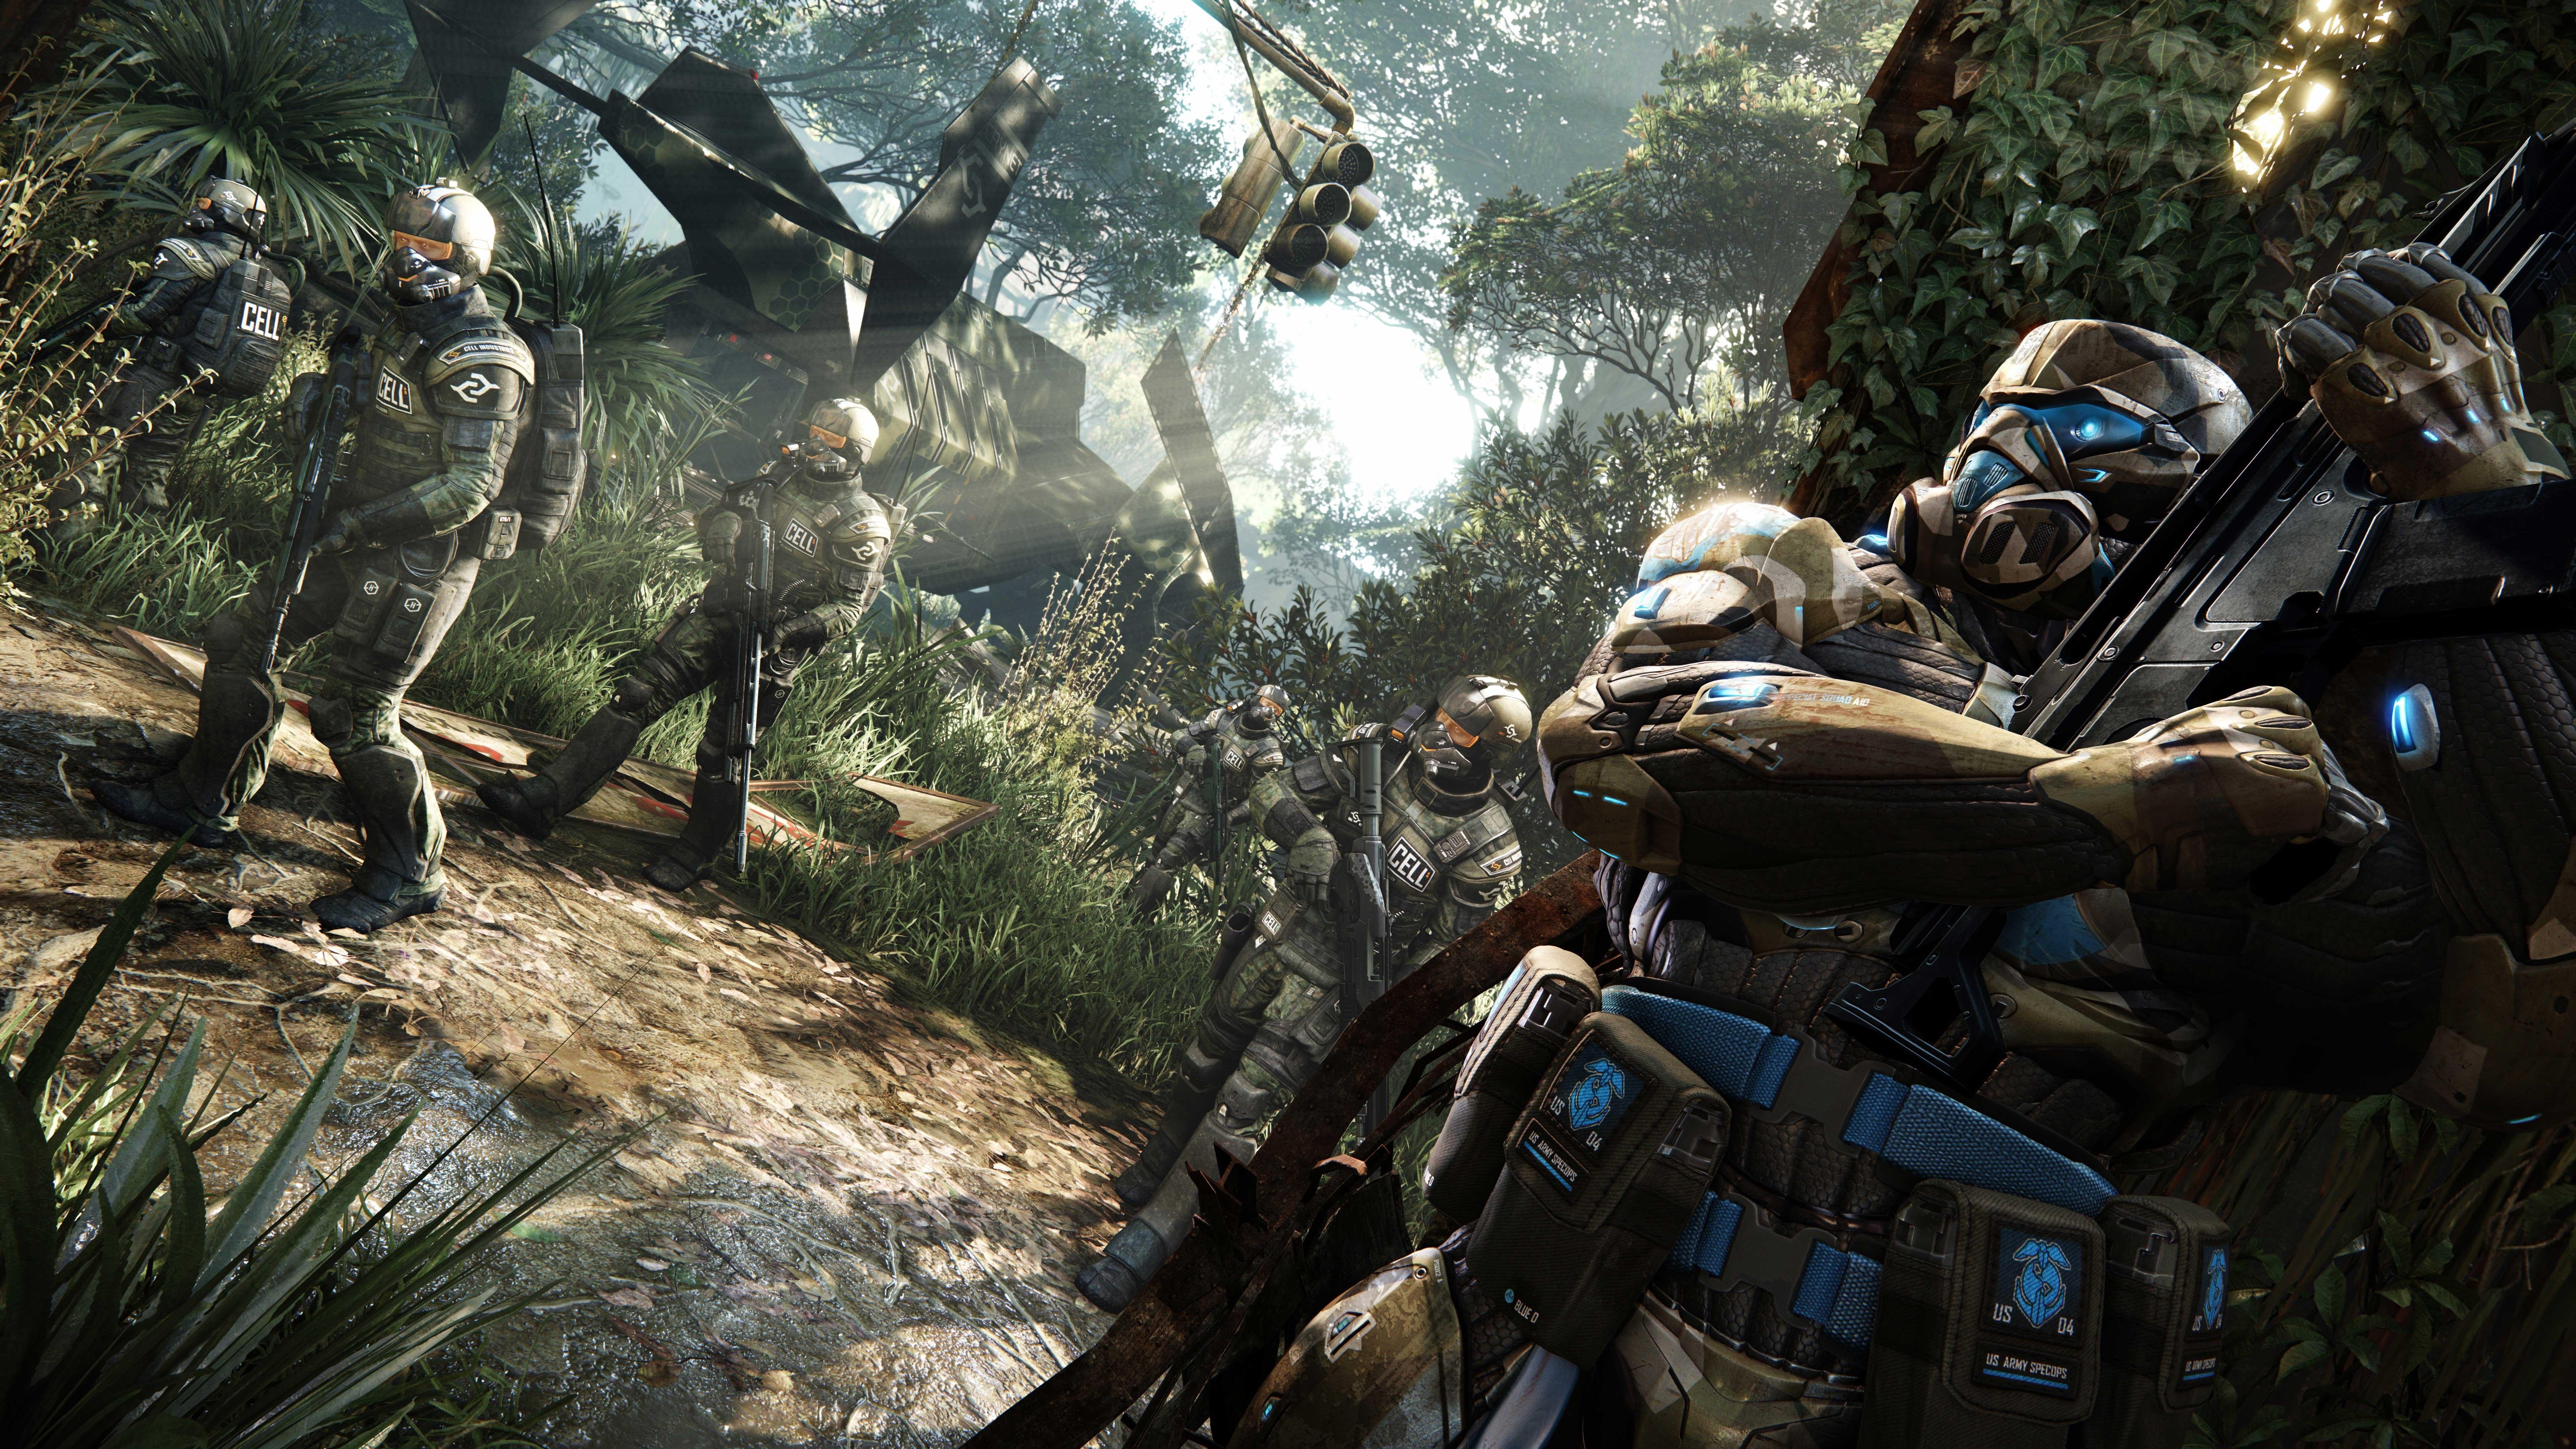 General 7680x4320 soldier Crysis video games video game art